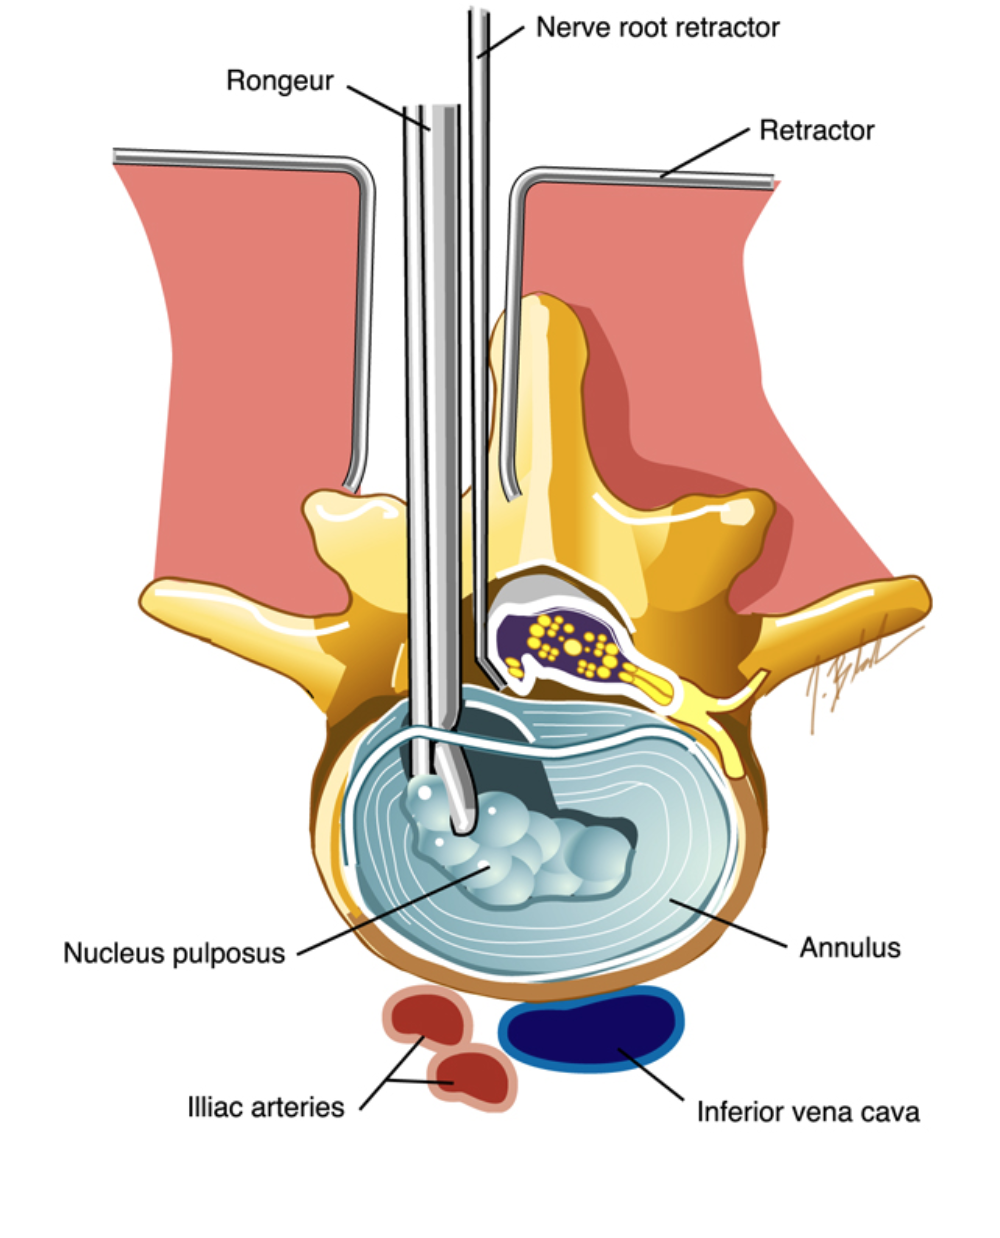 What is the code for a lumbar Microdiscectomy?